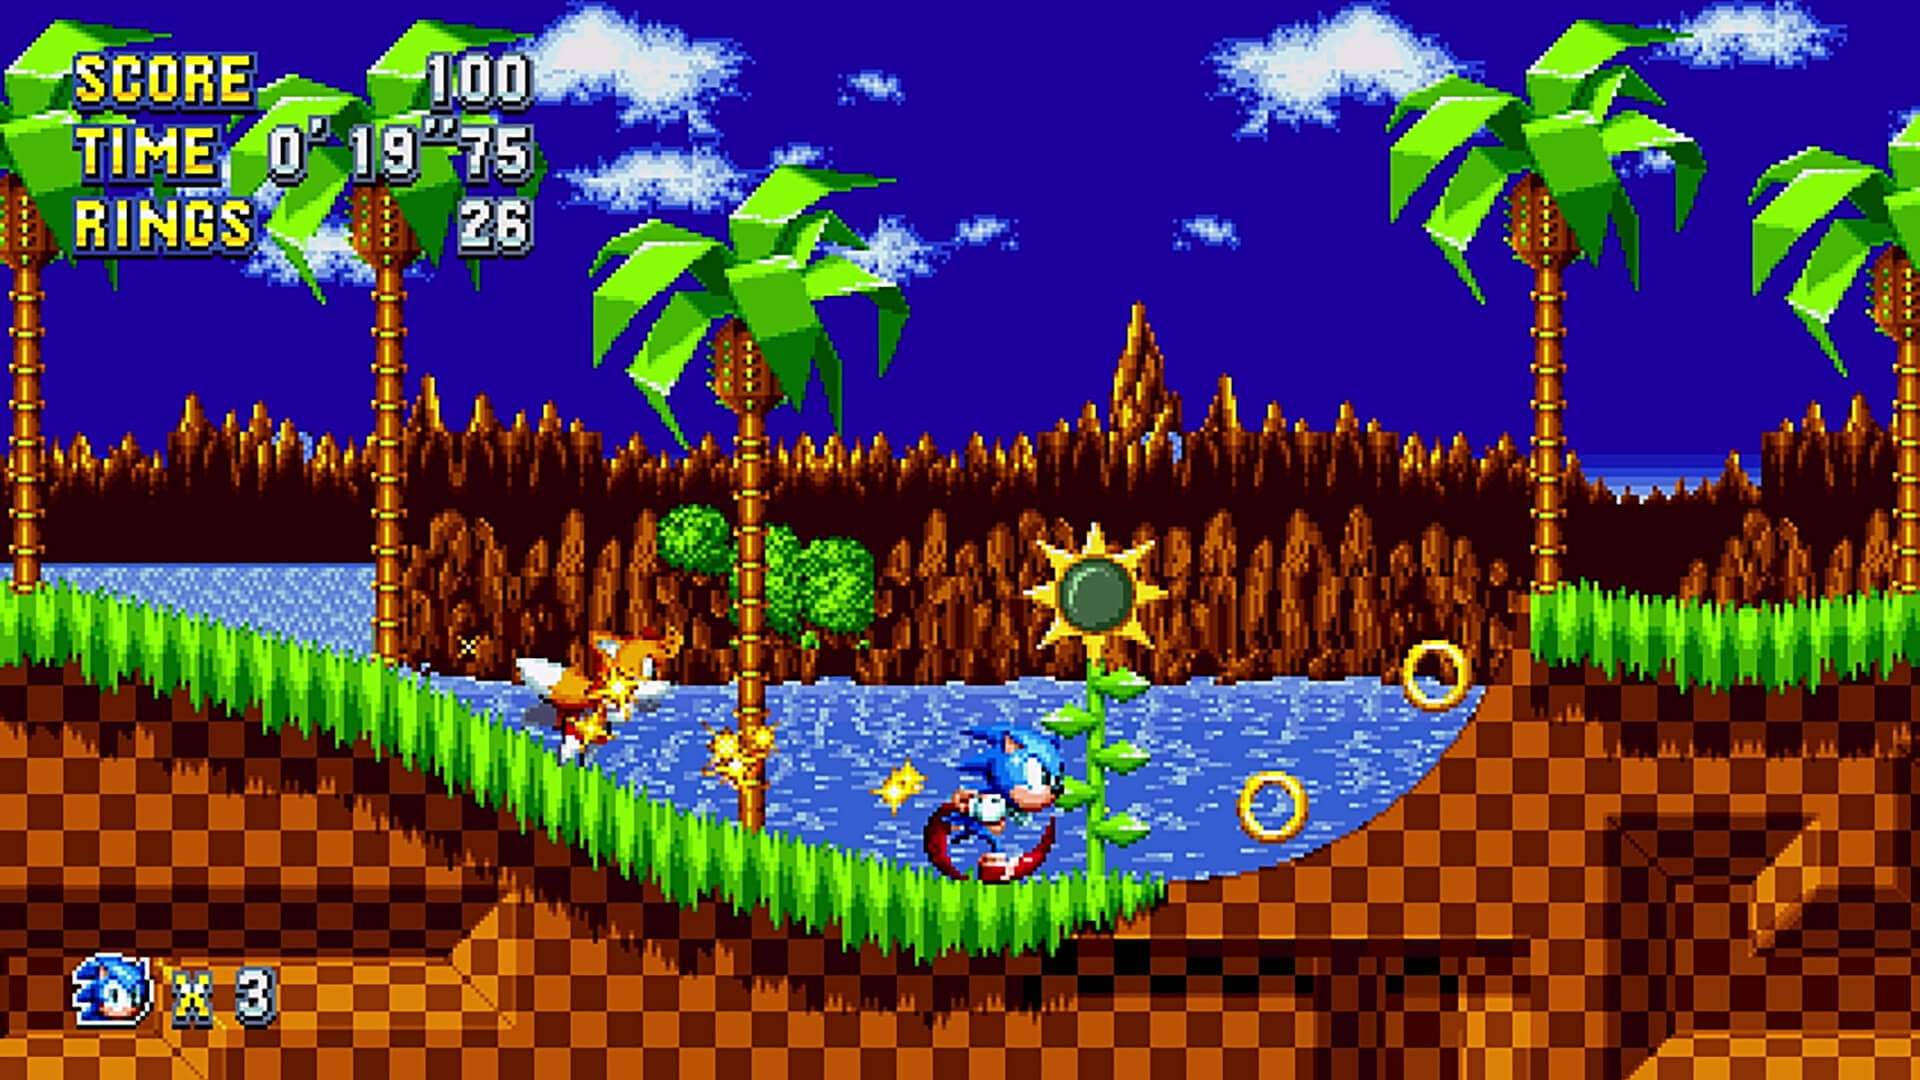 Sonic Mania, a game created by Evening Star, which is now a Private Division partner